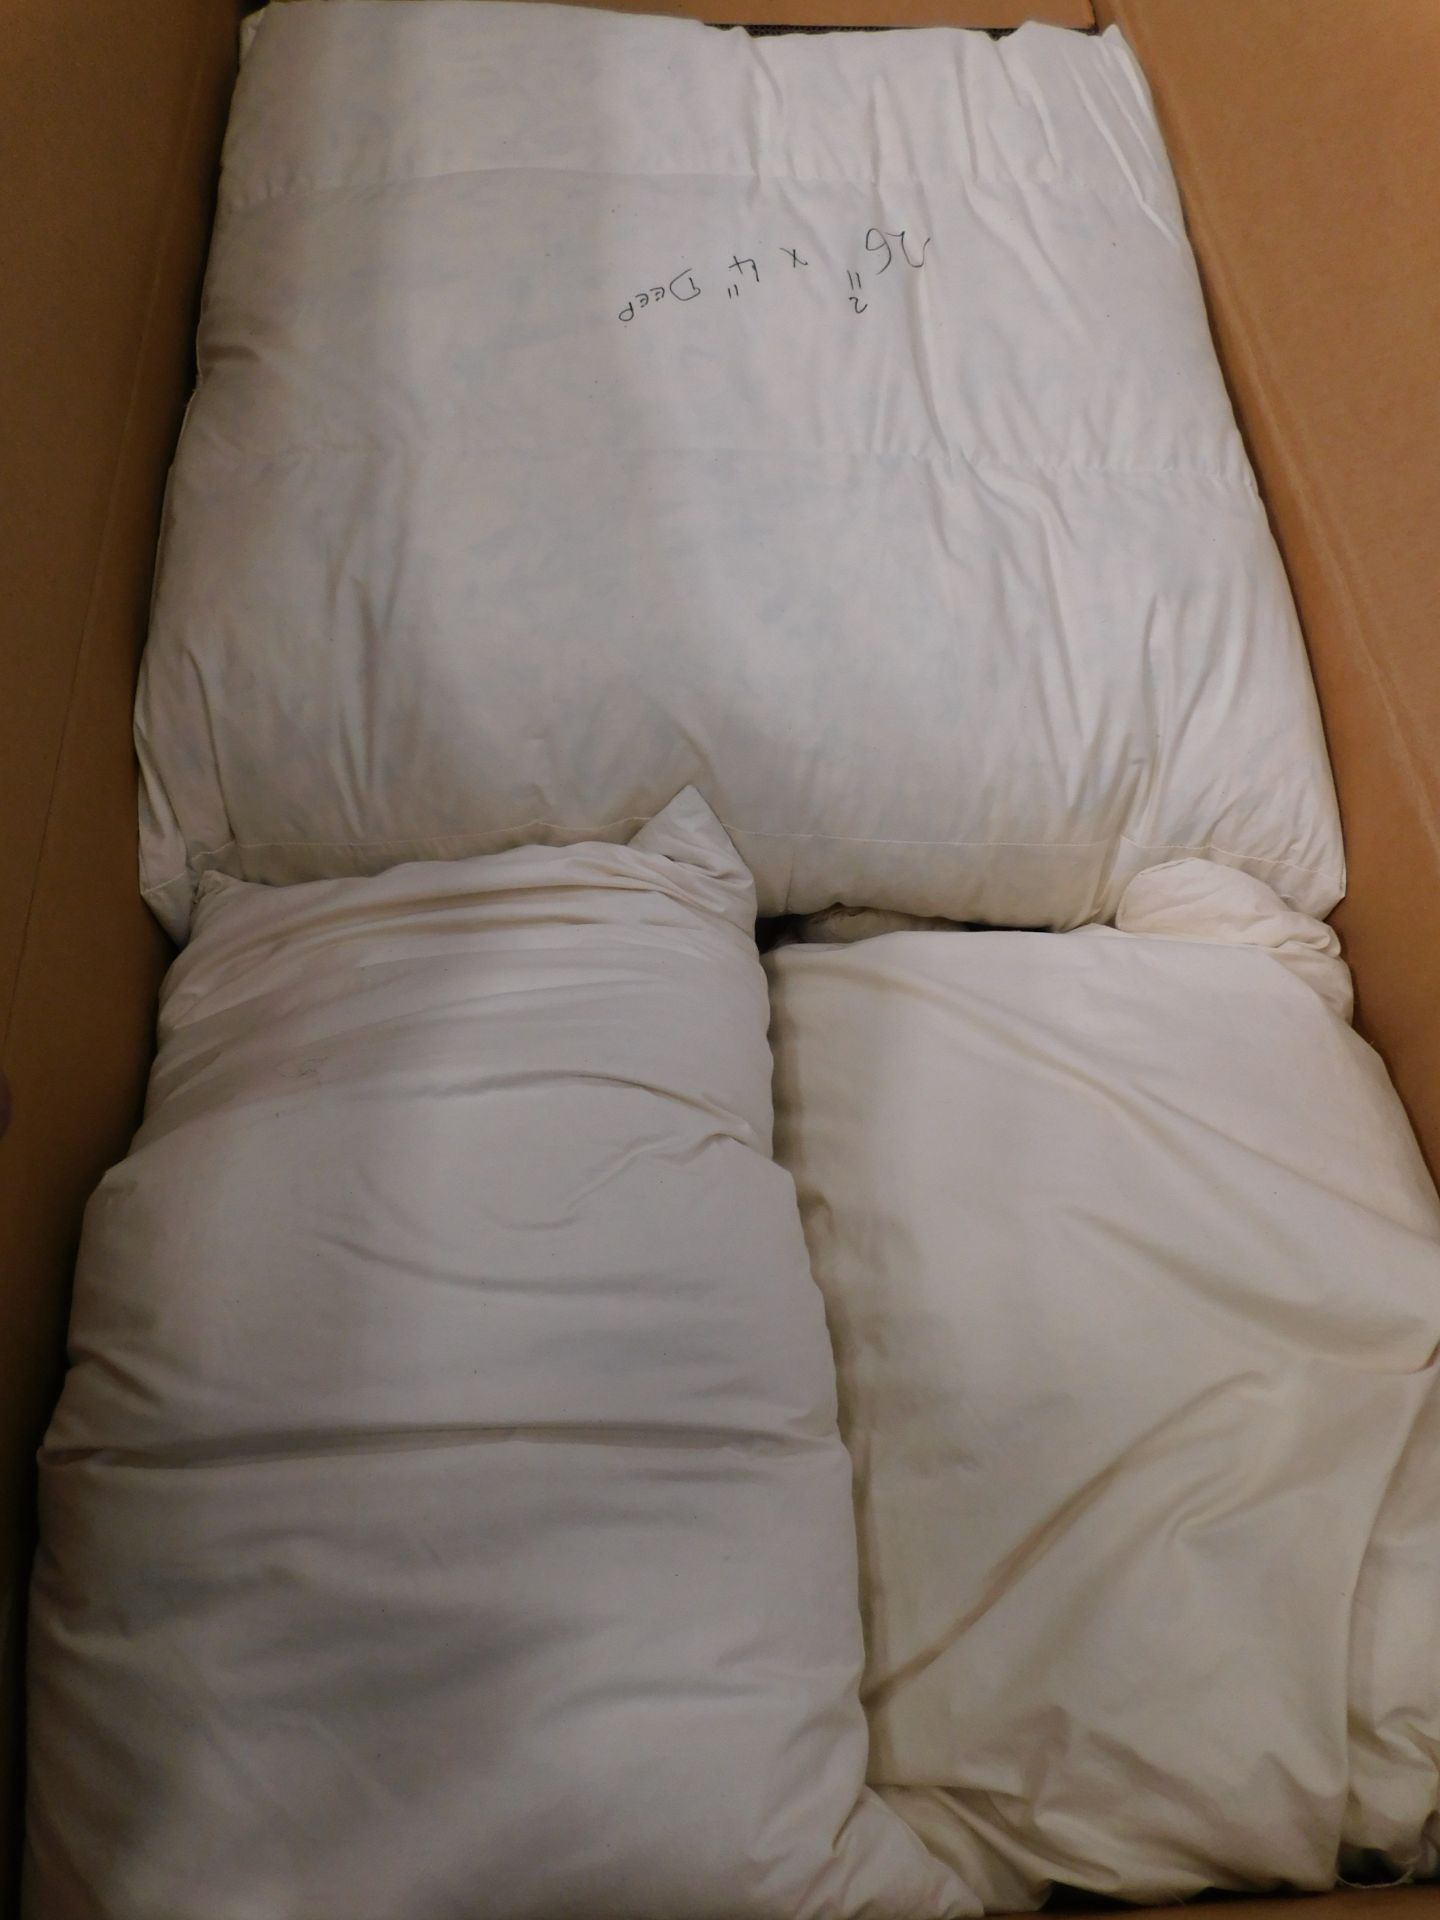 3 Boxes of Assorted Display Cushions/Pillows etc (Location Grantham. Please See General Notes) - Image 4 of 4